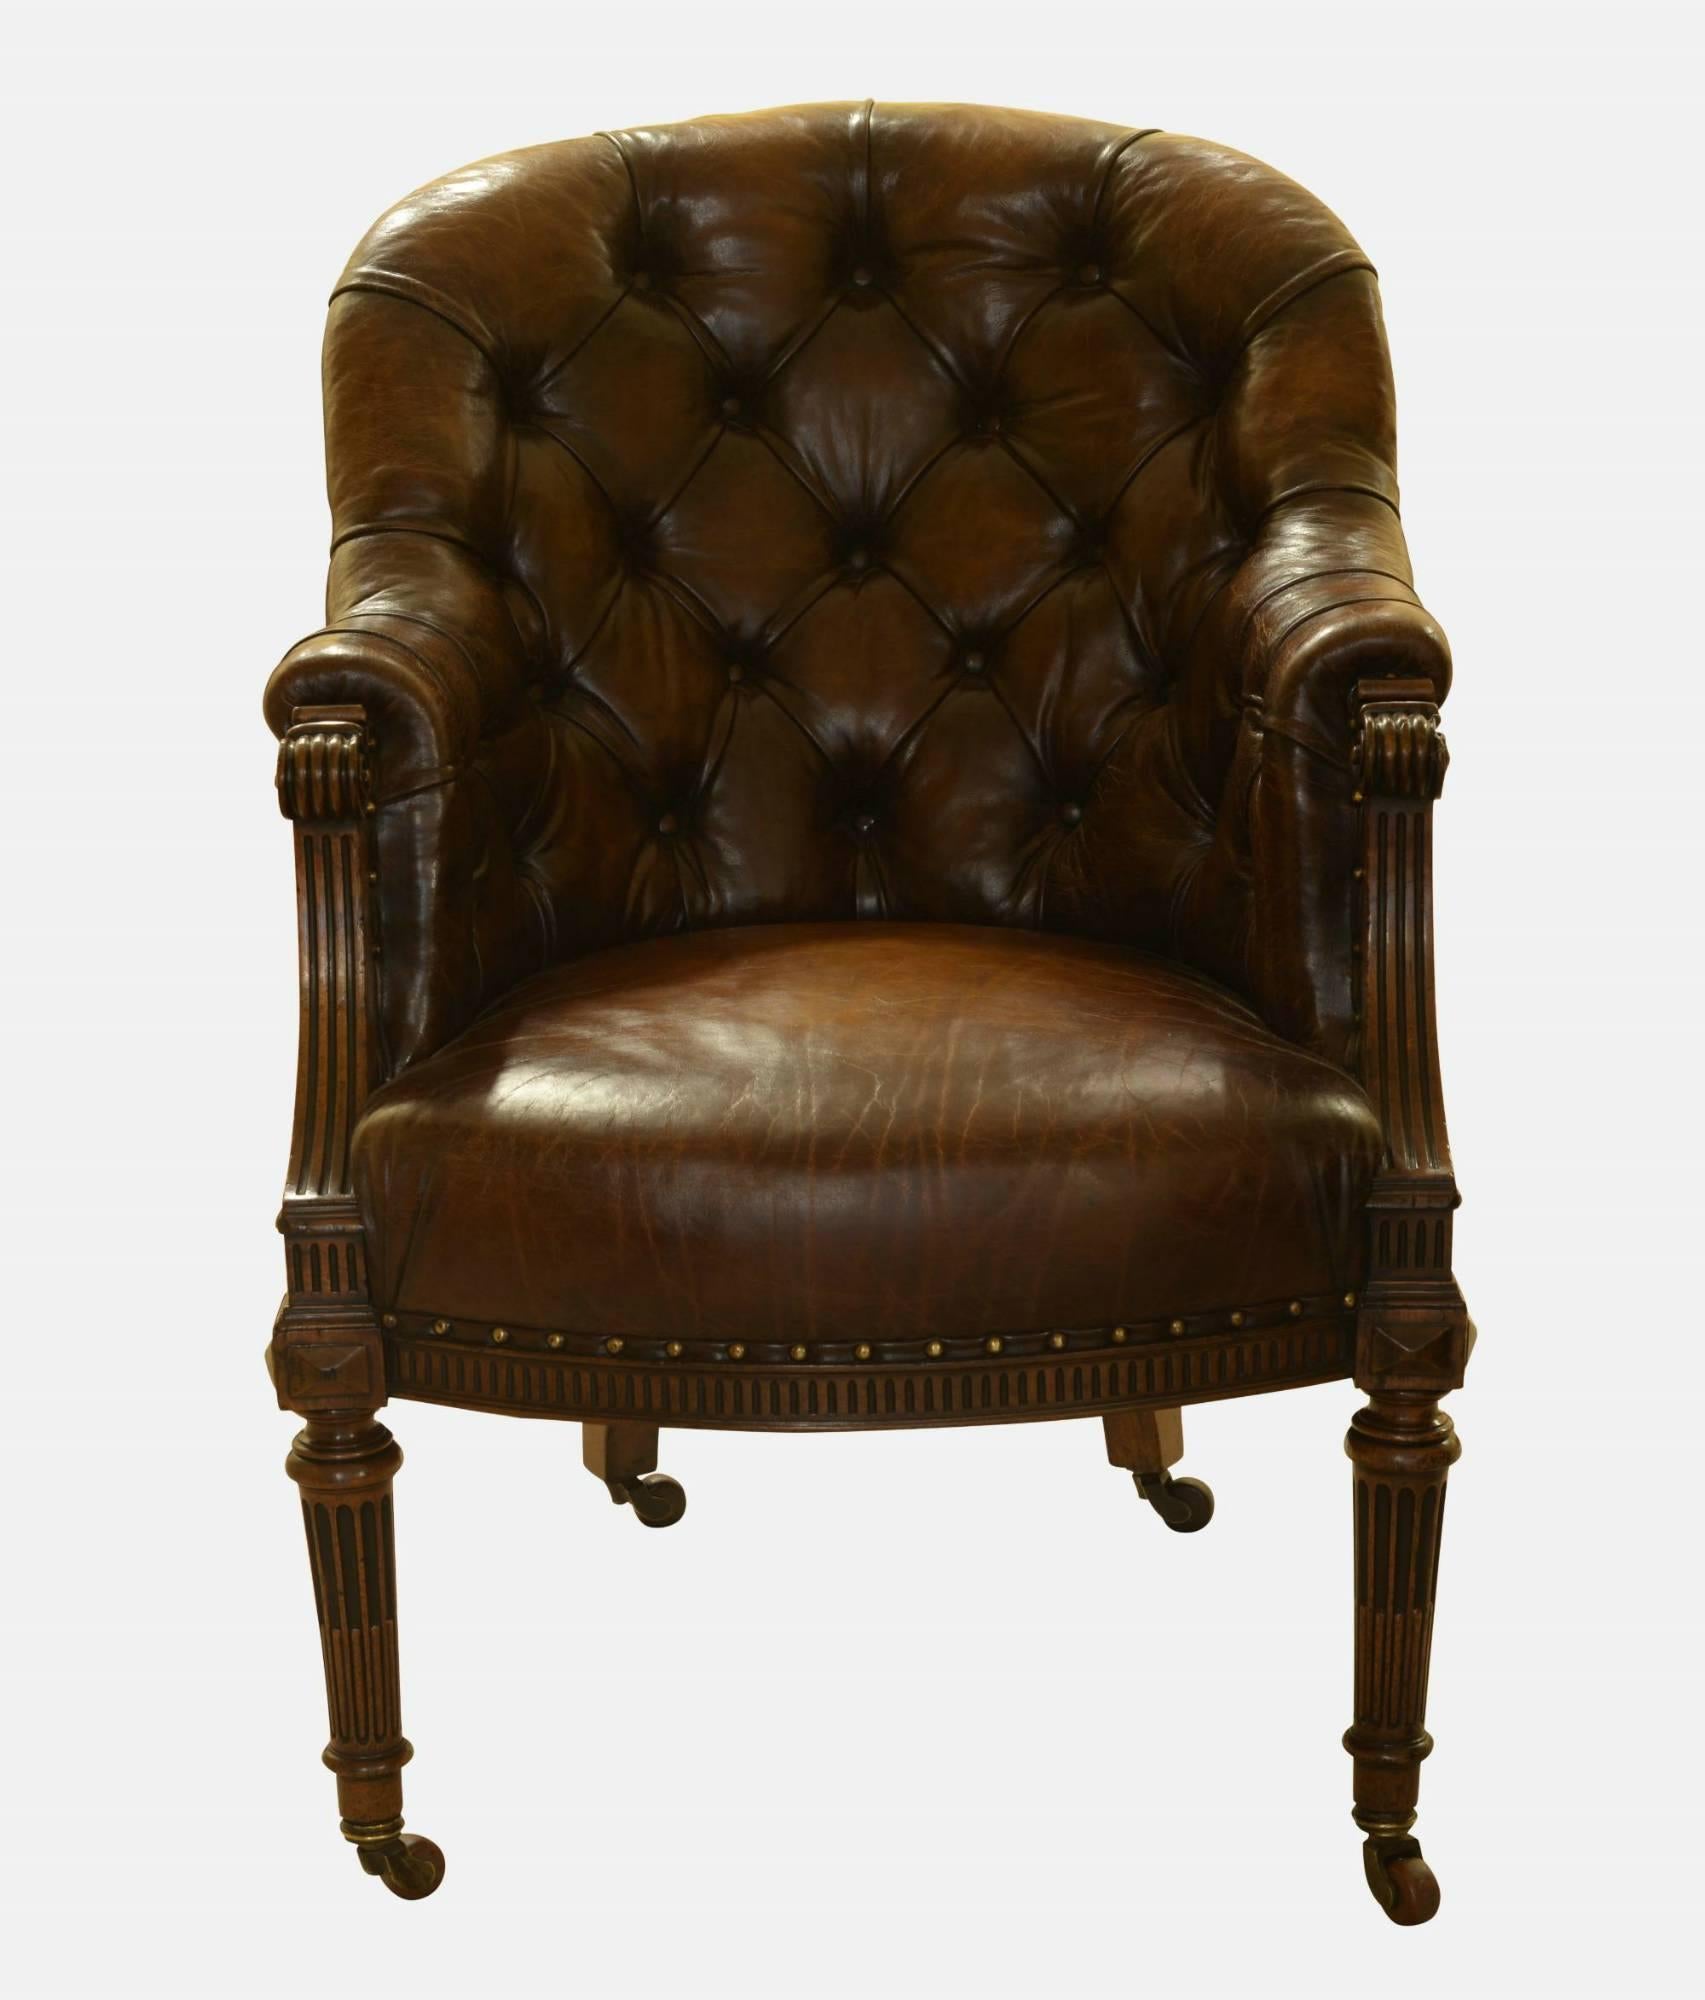 A pair of stunningly carved Regency mahogany leather Liberty chairs.